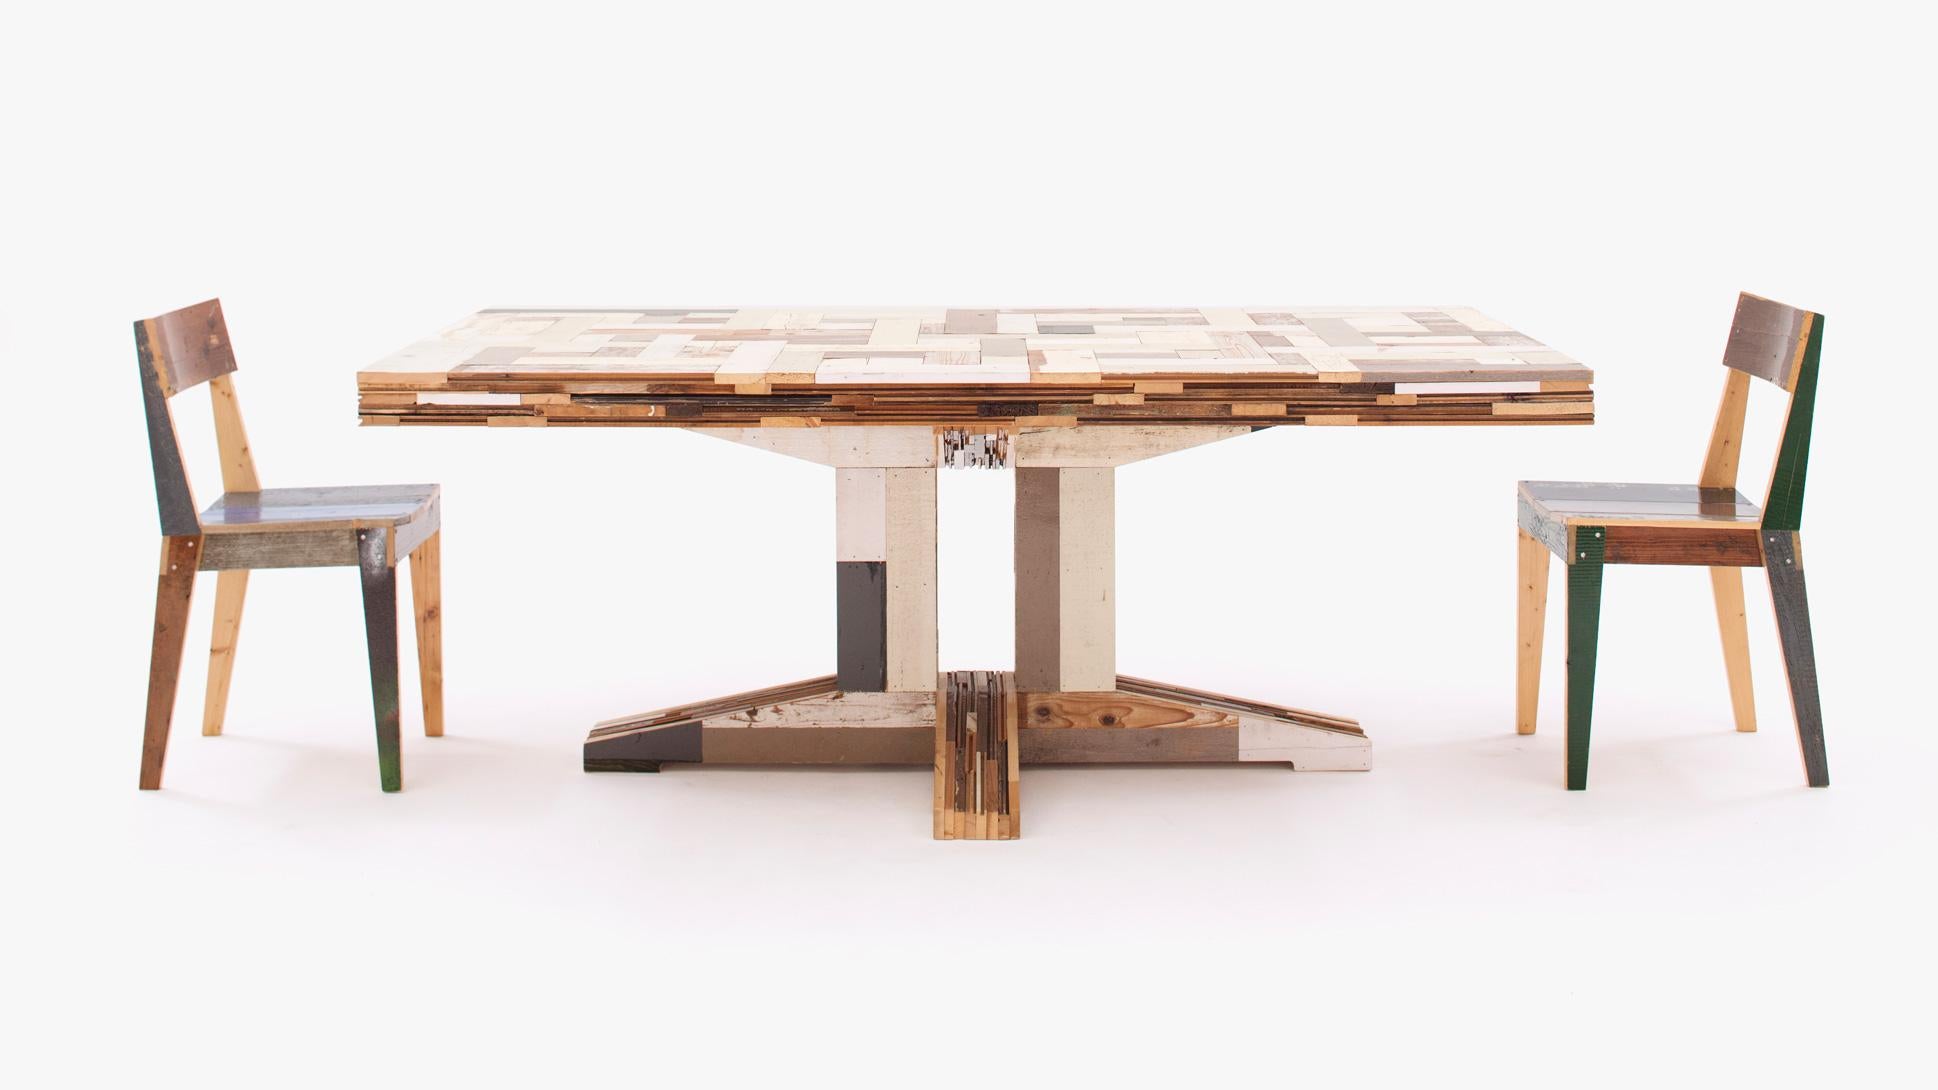 Contemporary wooden dining table, Waste table in scrapwood by Piet Hein Eek

The Waste Table in Scrapwood is meticulously crafted in Piet Hein Eek's studio using traditional woodworking technique. It brings his quintessential vocabulary of